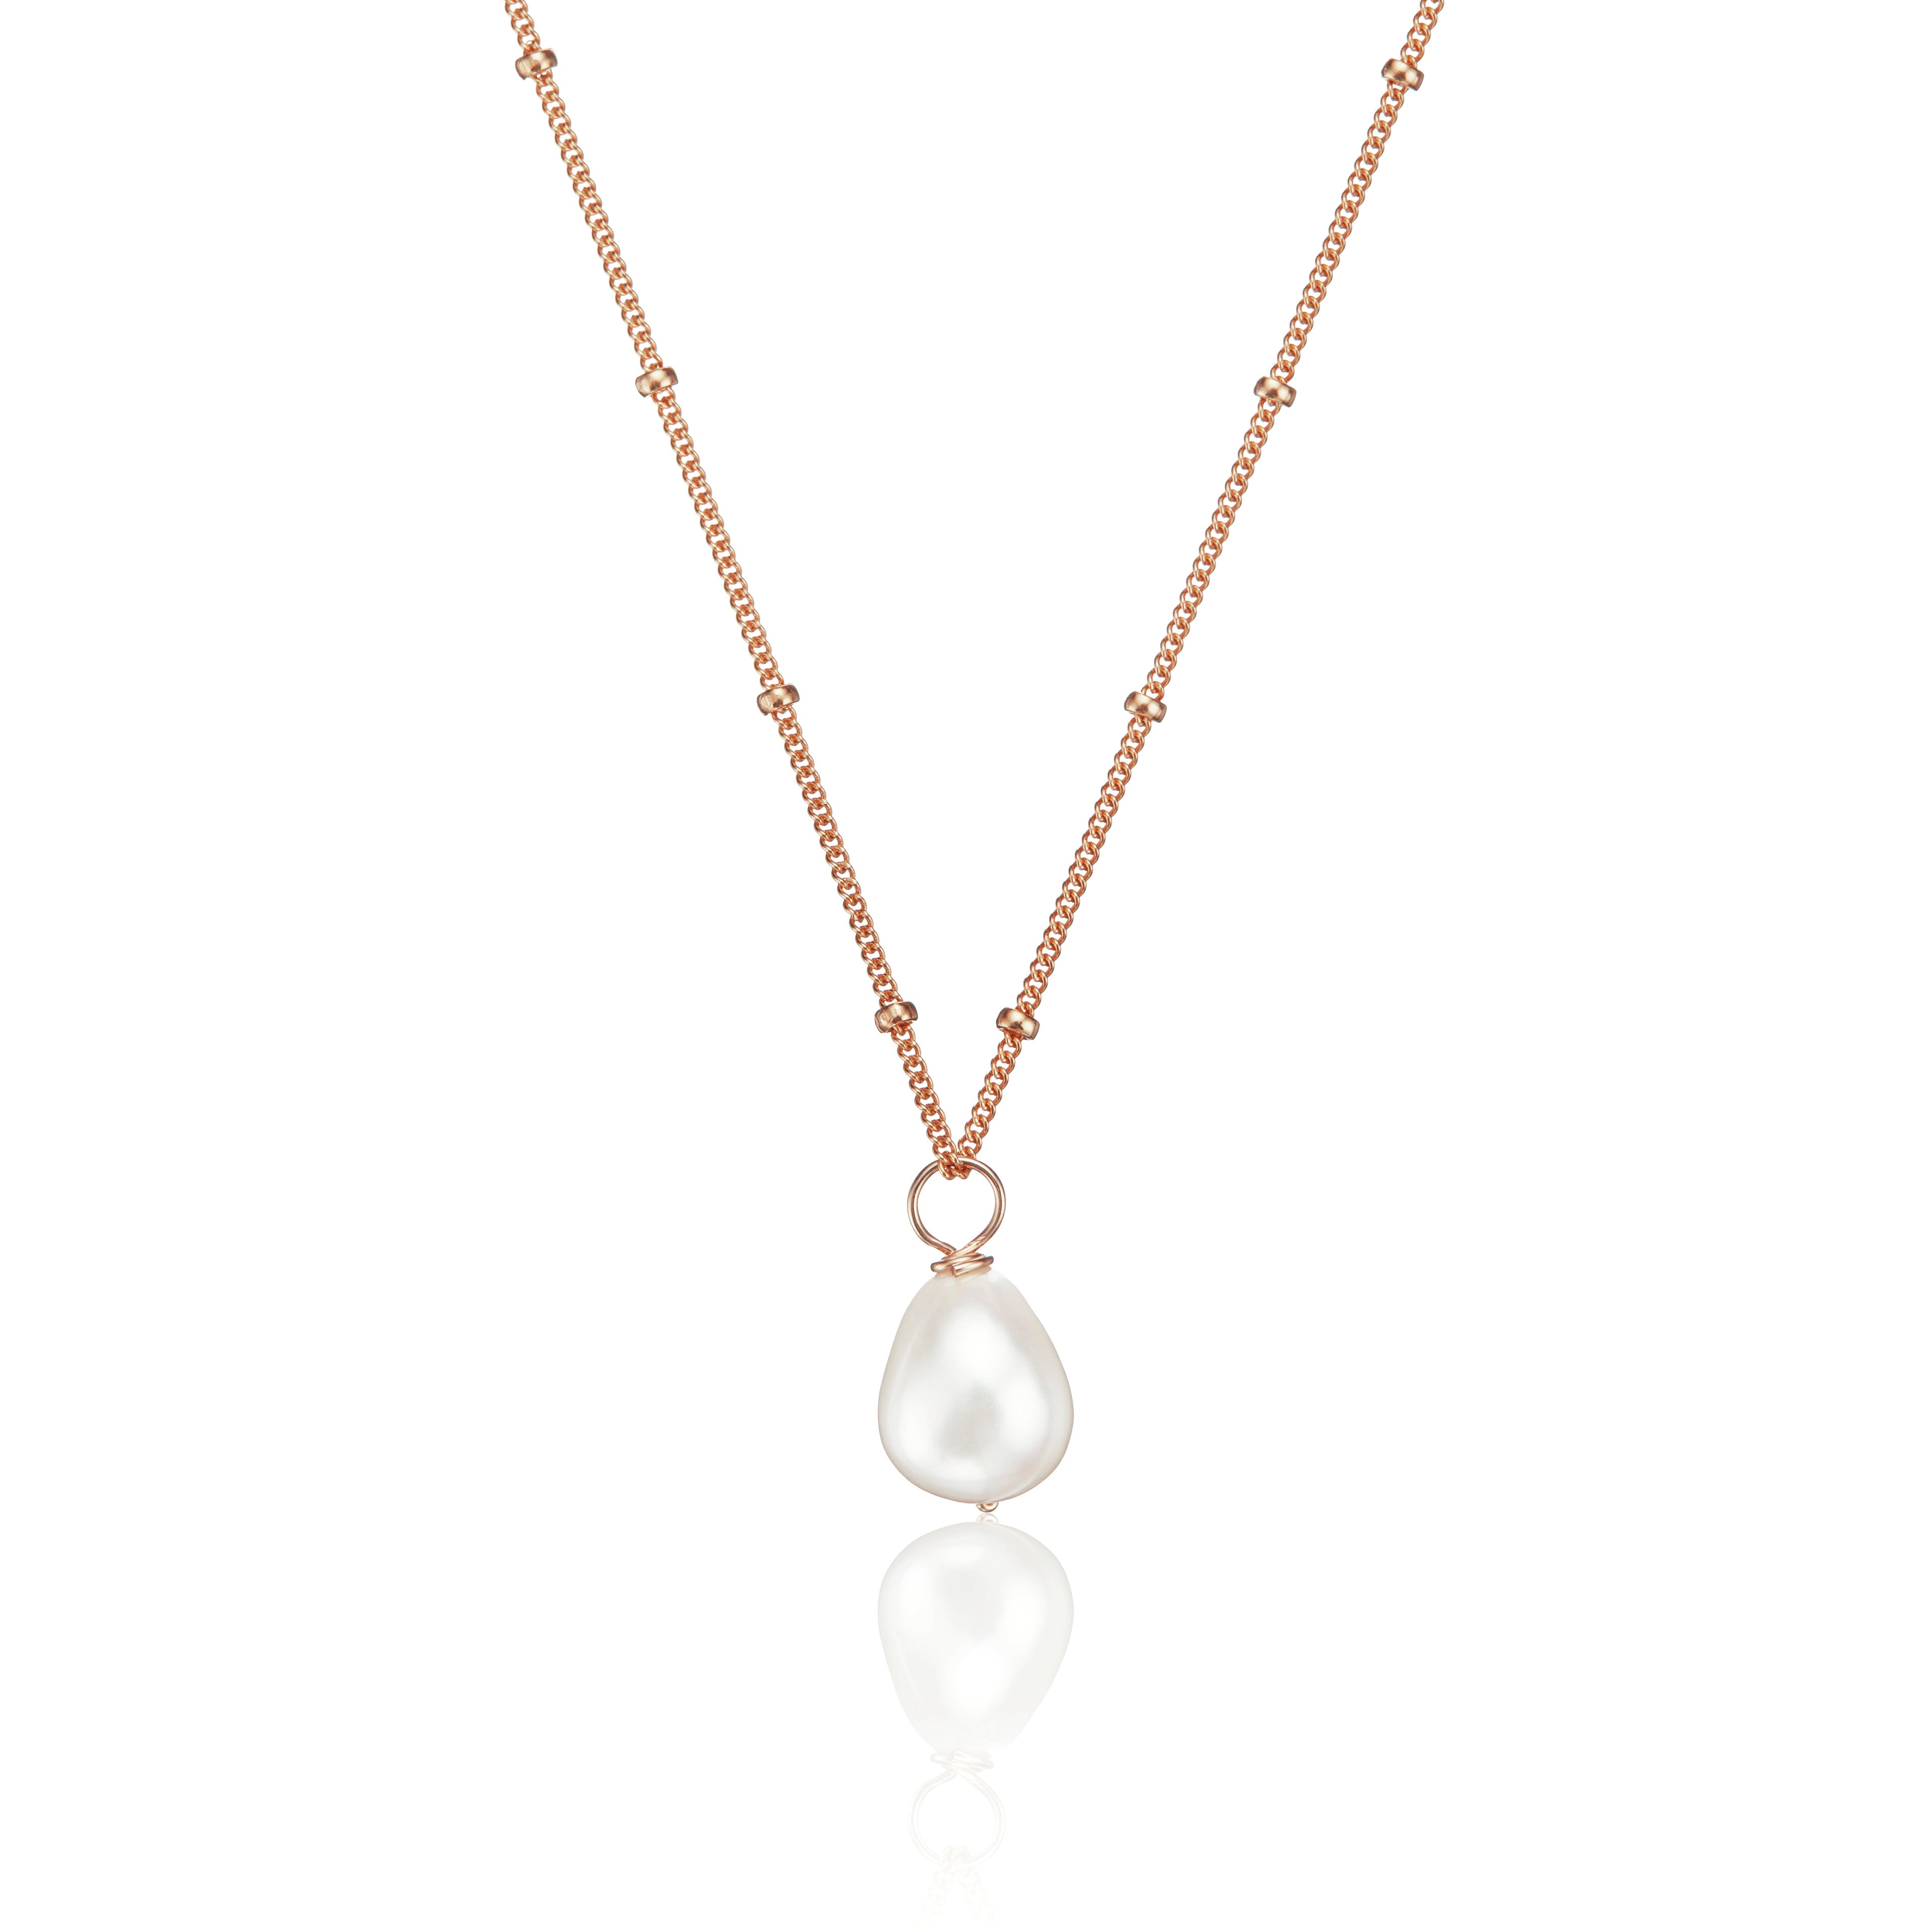 Rose gold large pearl satellite necklace on a white background